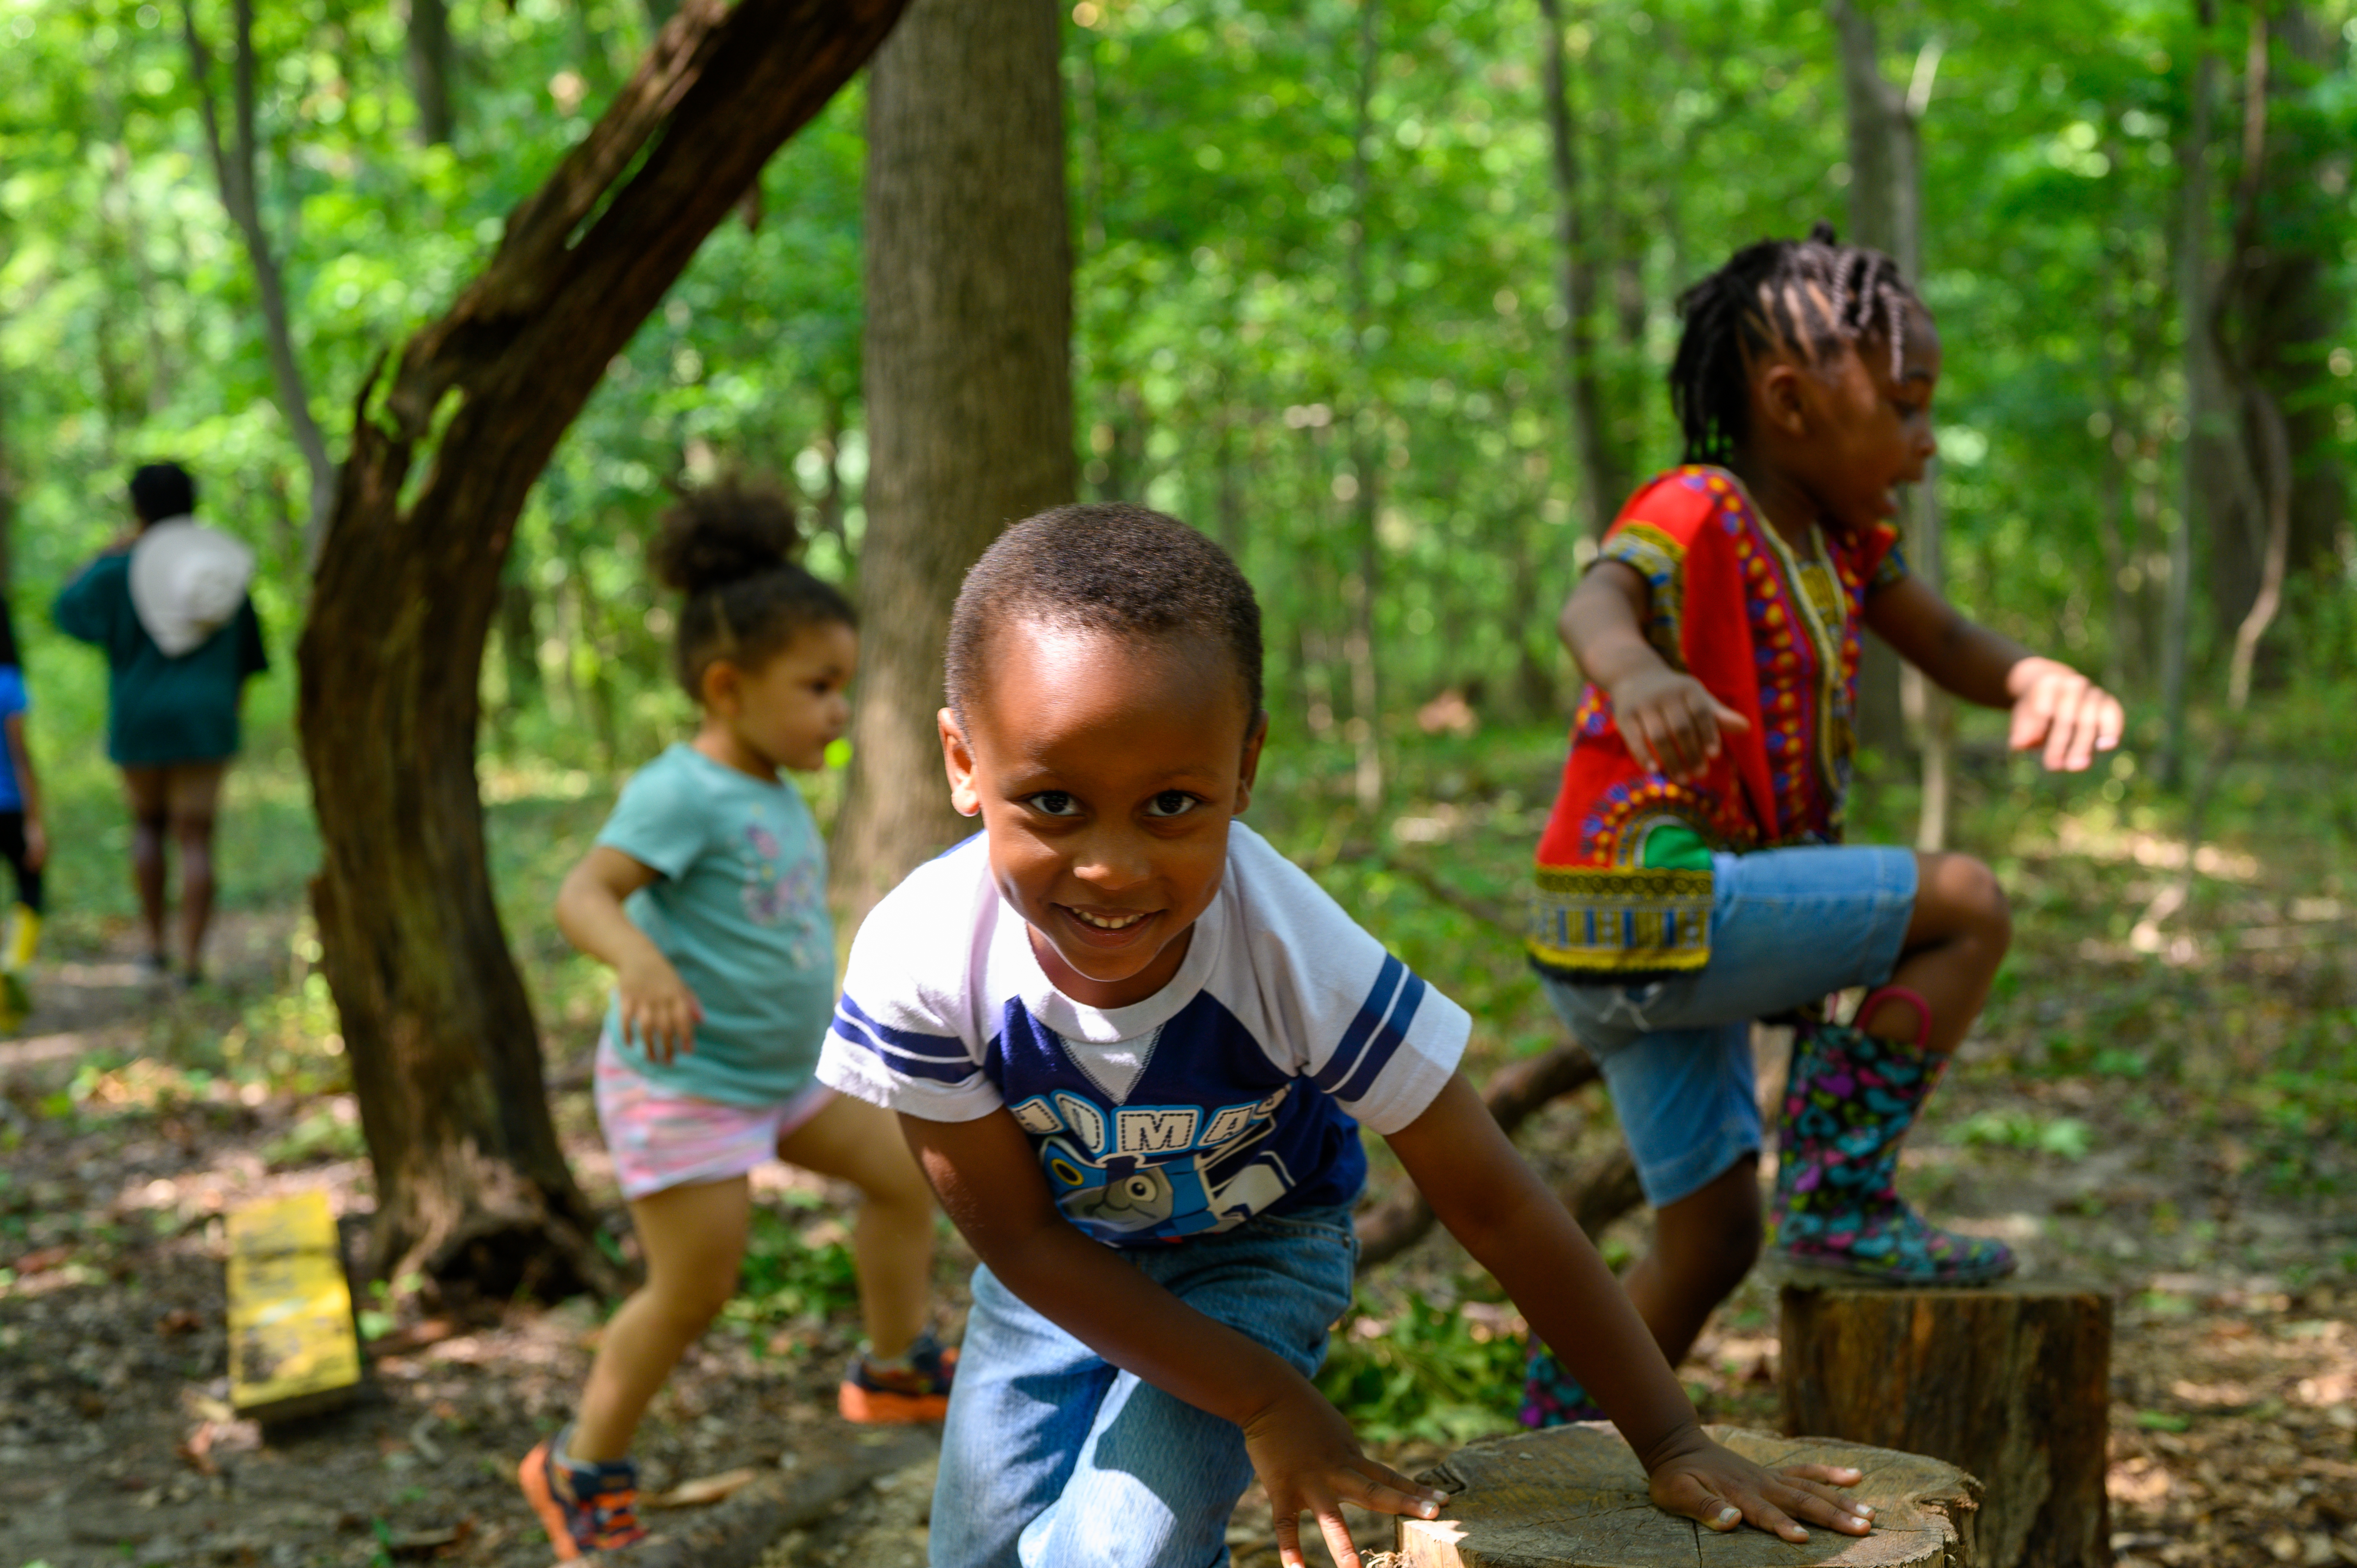 A little boy smiles while leaning on a tree stump in the woods